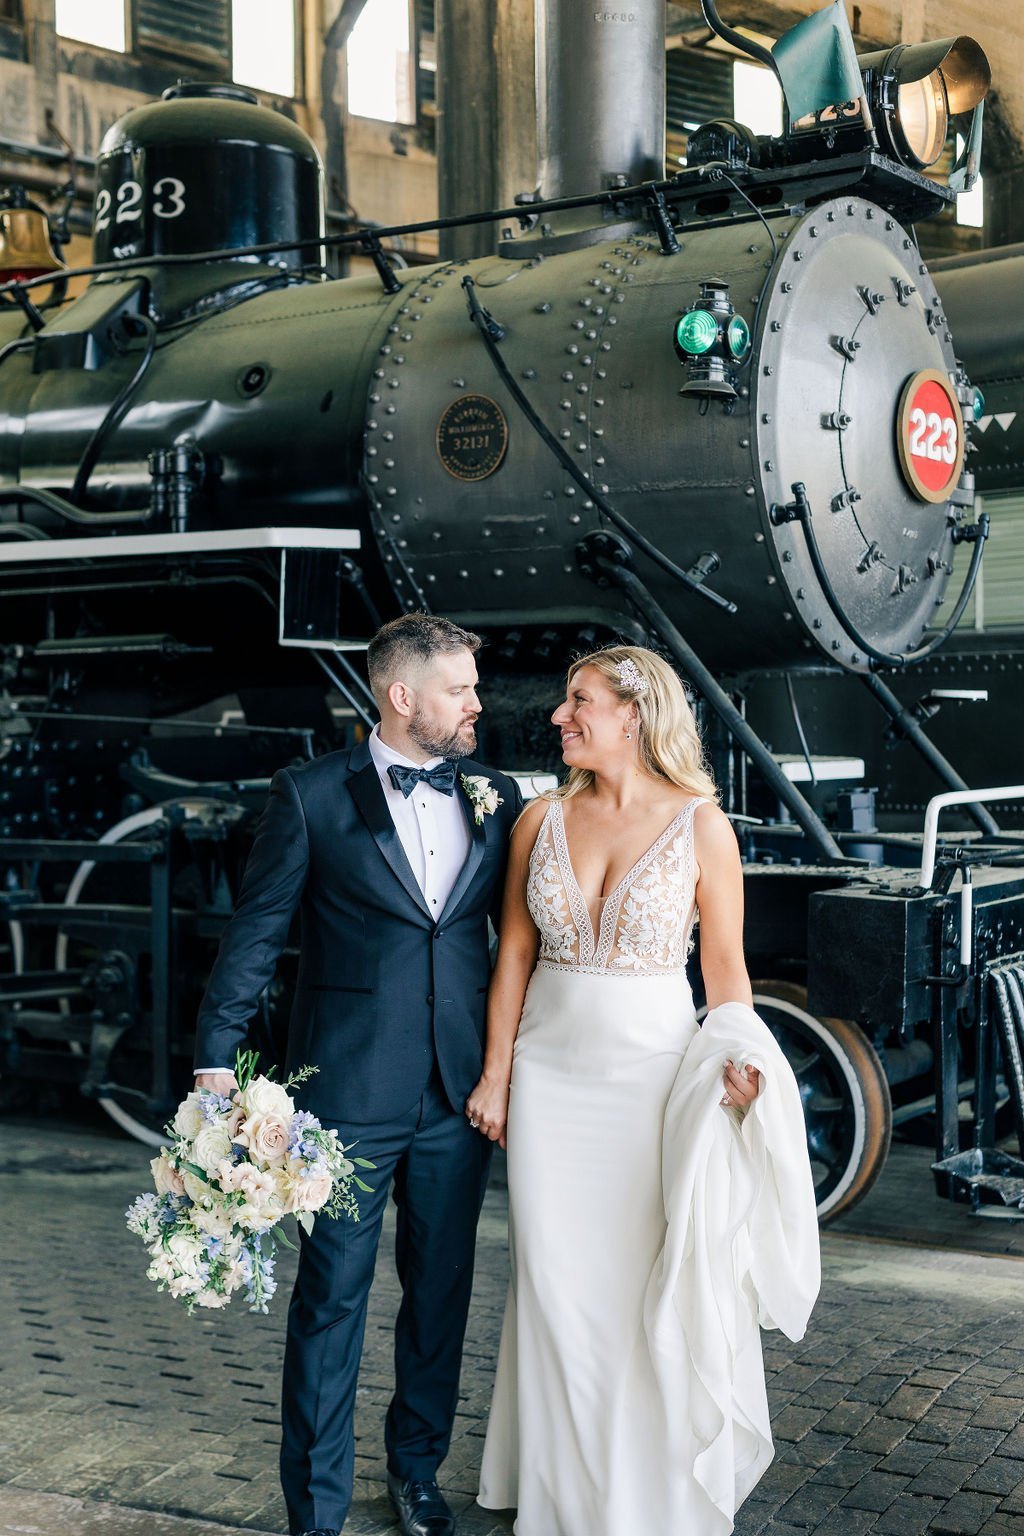 claudia-and-travis-romantic-southern-wedding-at-the-georgia-state-railroad-museum-in-savannah-georgia-planned-by-savannah-wedding-planner-and-savannah-florist-ivory-and-beau-8.jpg